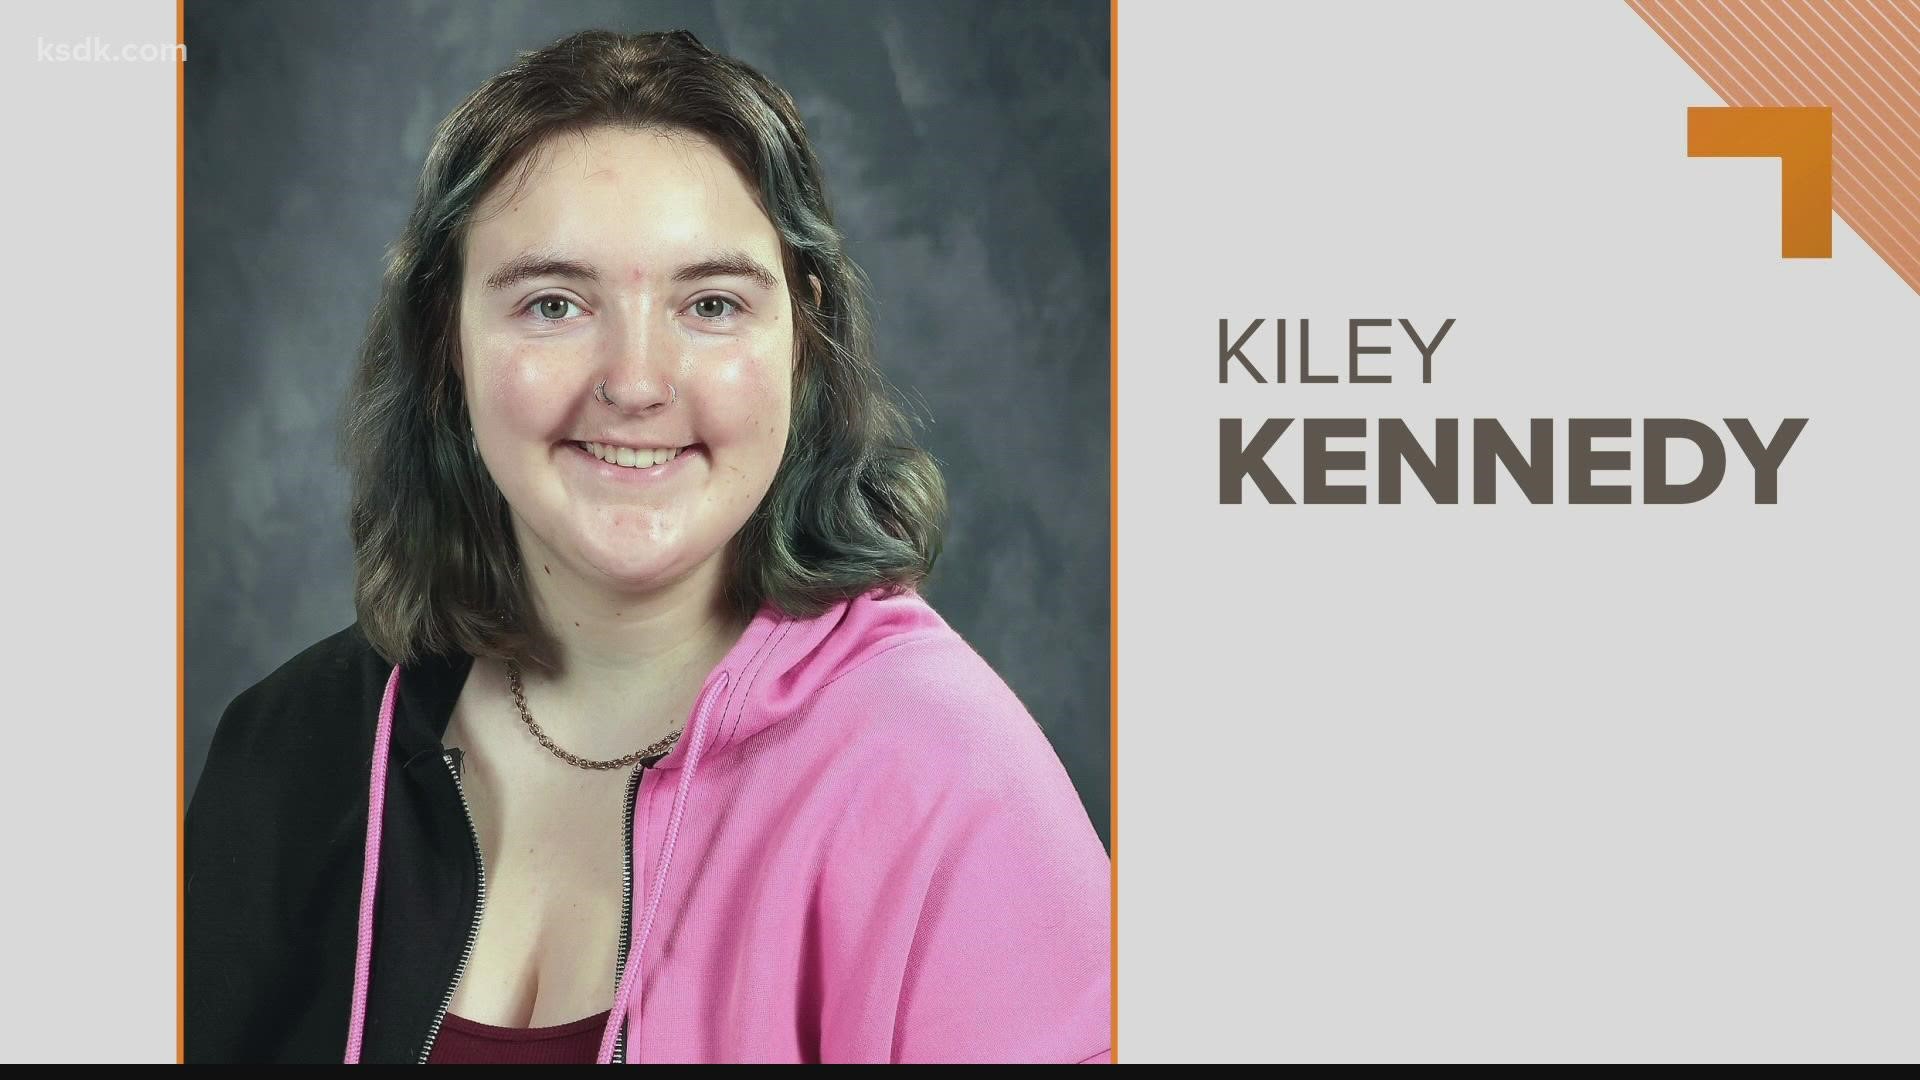 Kiley Kennedy, 18, was found dead in Pacific Wednesday morning. She was senior at Eureka High School.